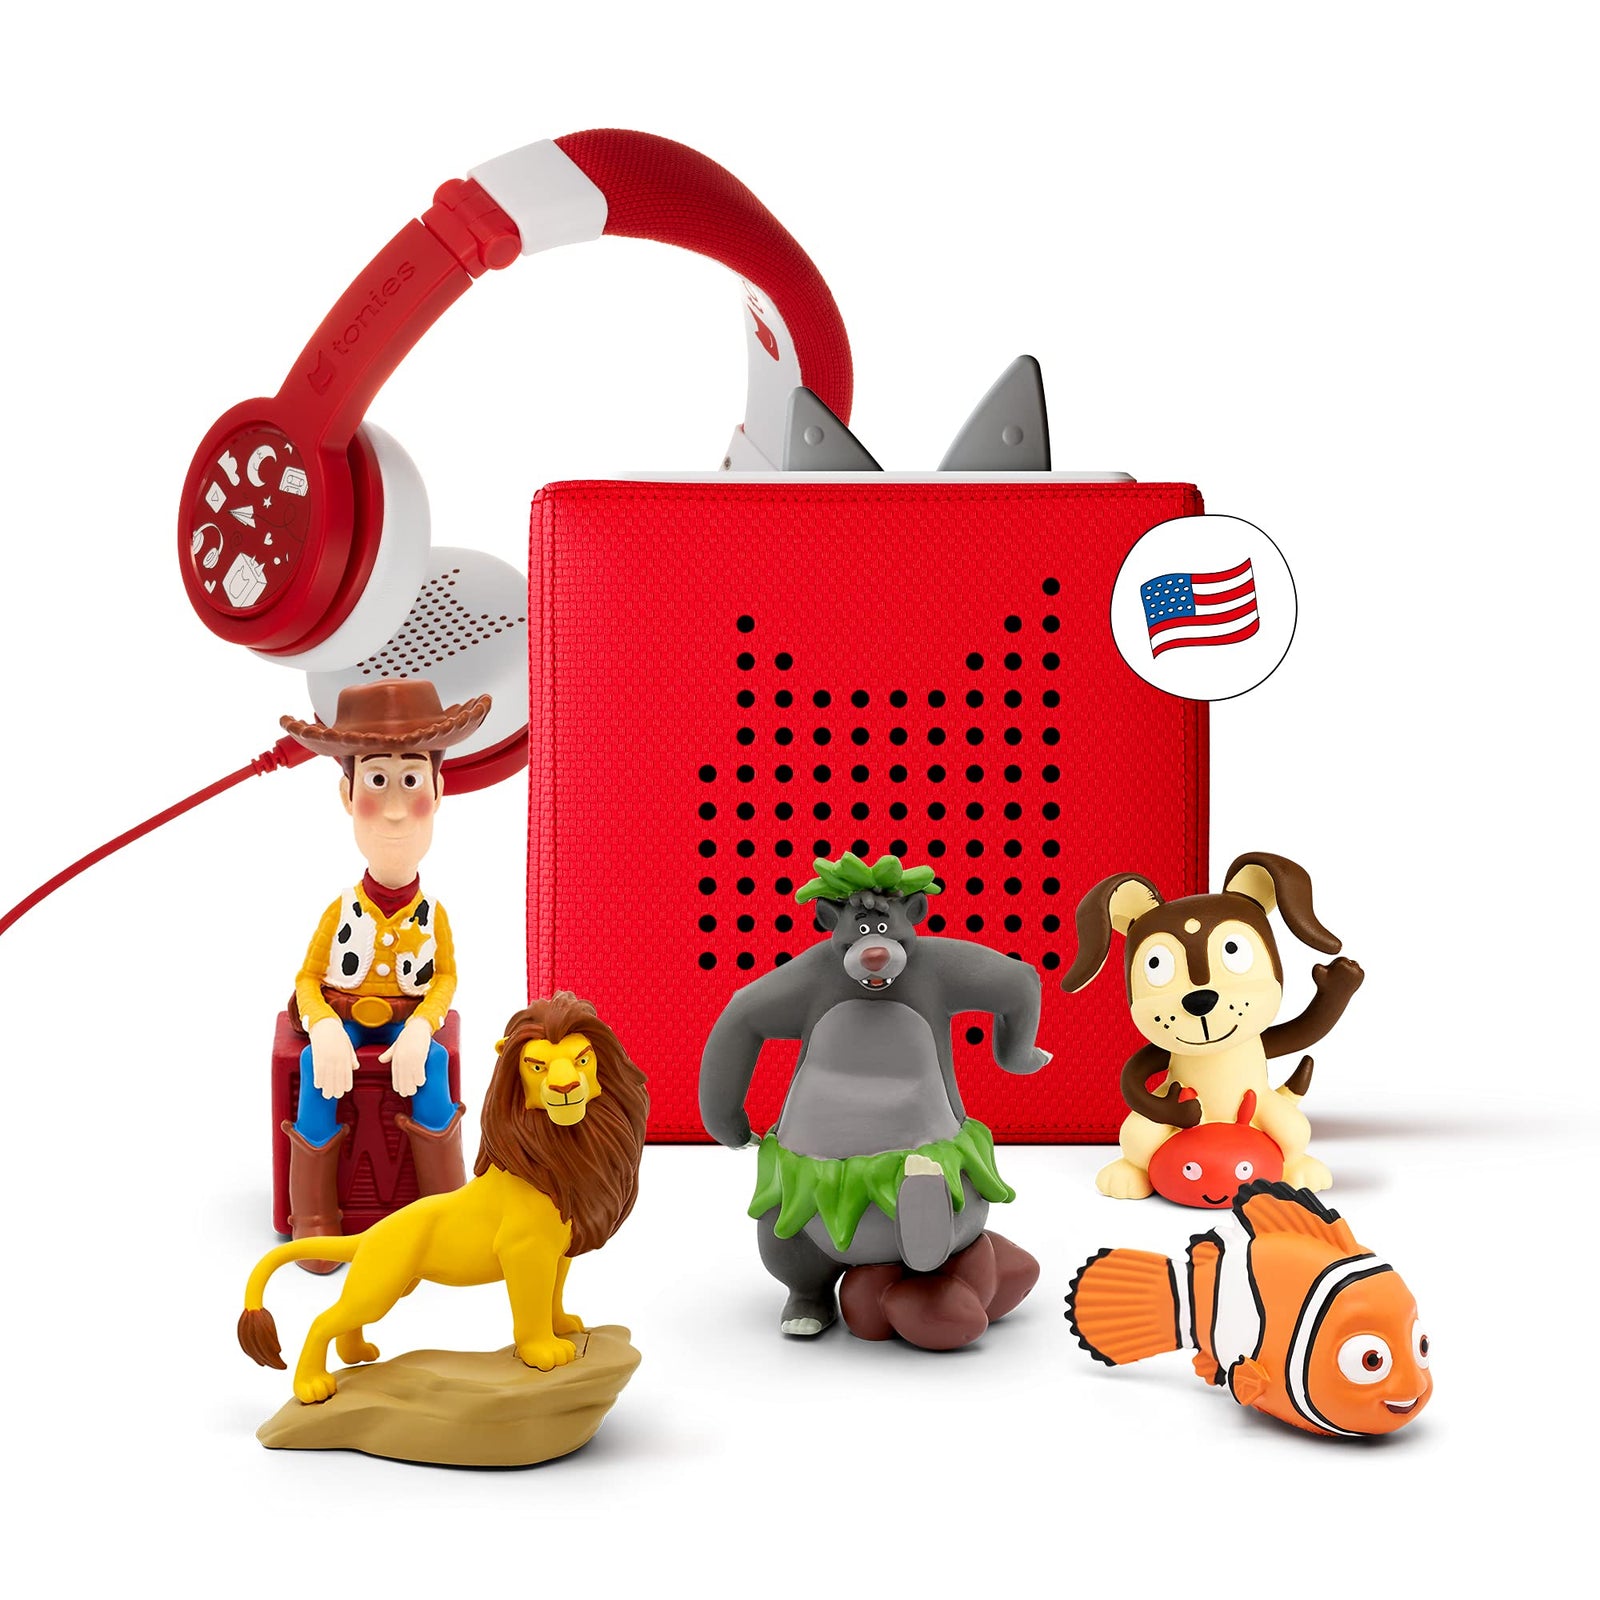 Toniebox Audio Player Starter Set with Woody, Simba, Nemo, Baloo, Playtime Puppy, and Foldable Headphones Imagination Building, Screen-Free Digital Listening Experience for Stories & Music - Red